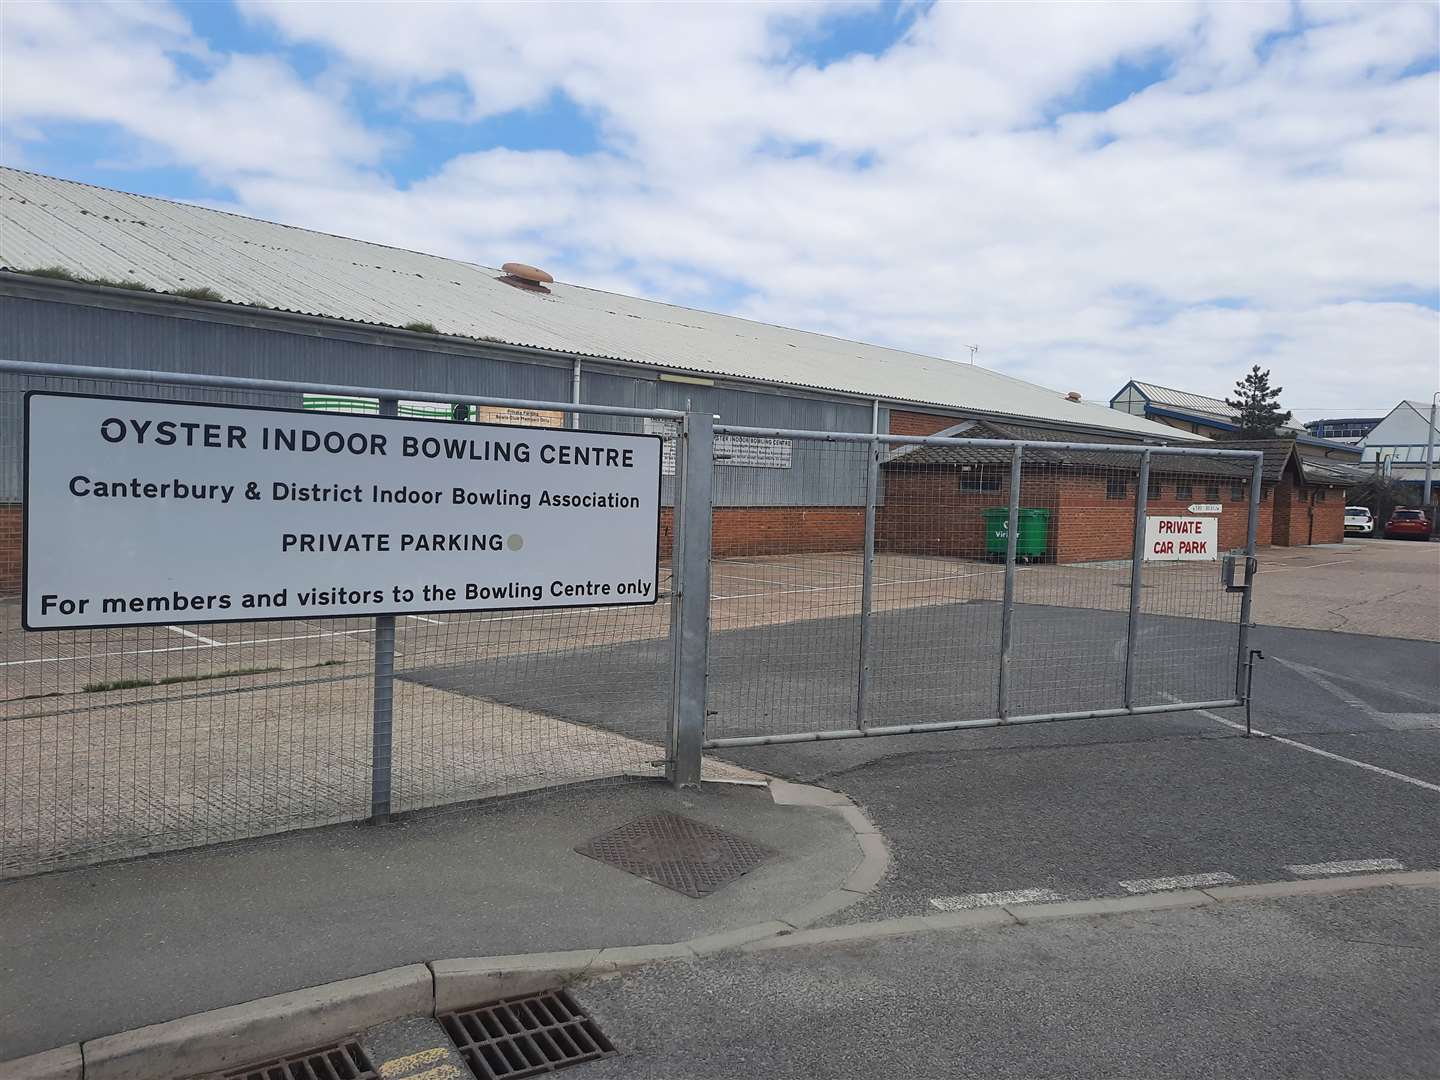 The Oyster Indoor Bowling Centre in Whitstable is one of the 177 sites that developers have put forward for the city council's new Local Plan